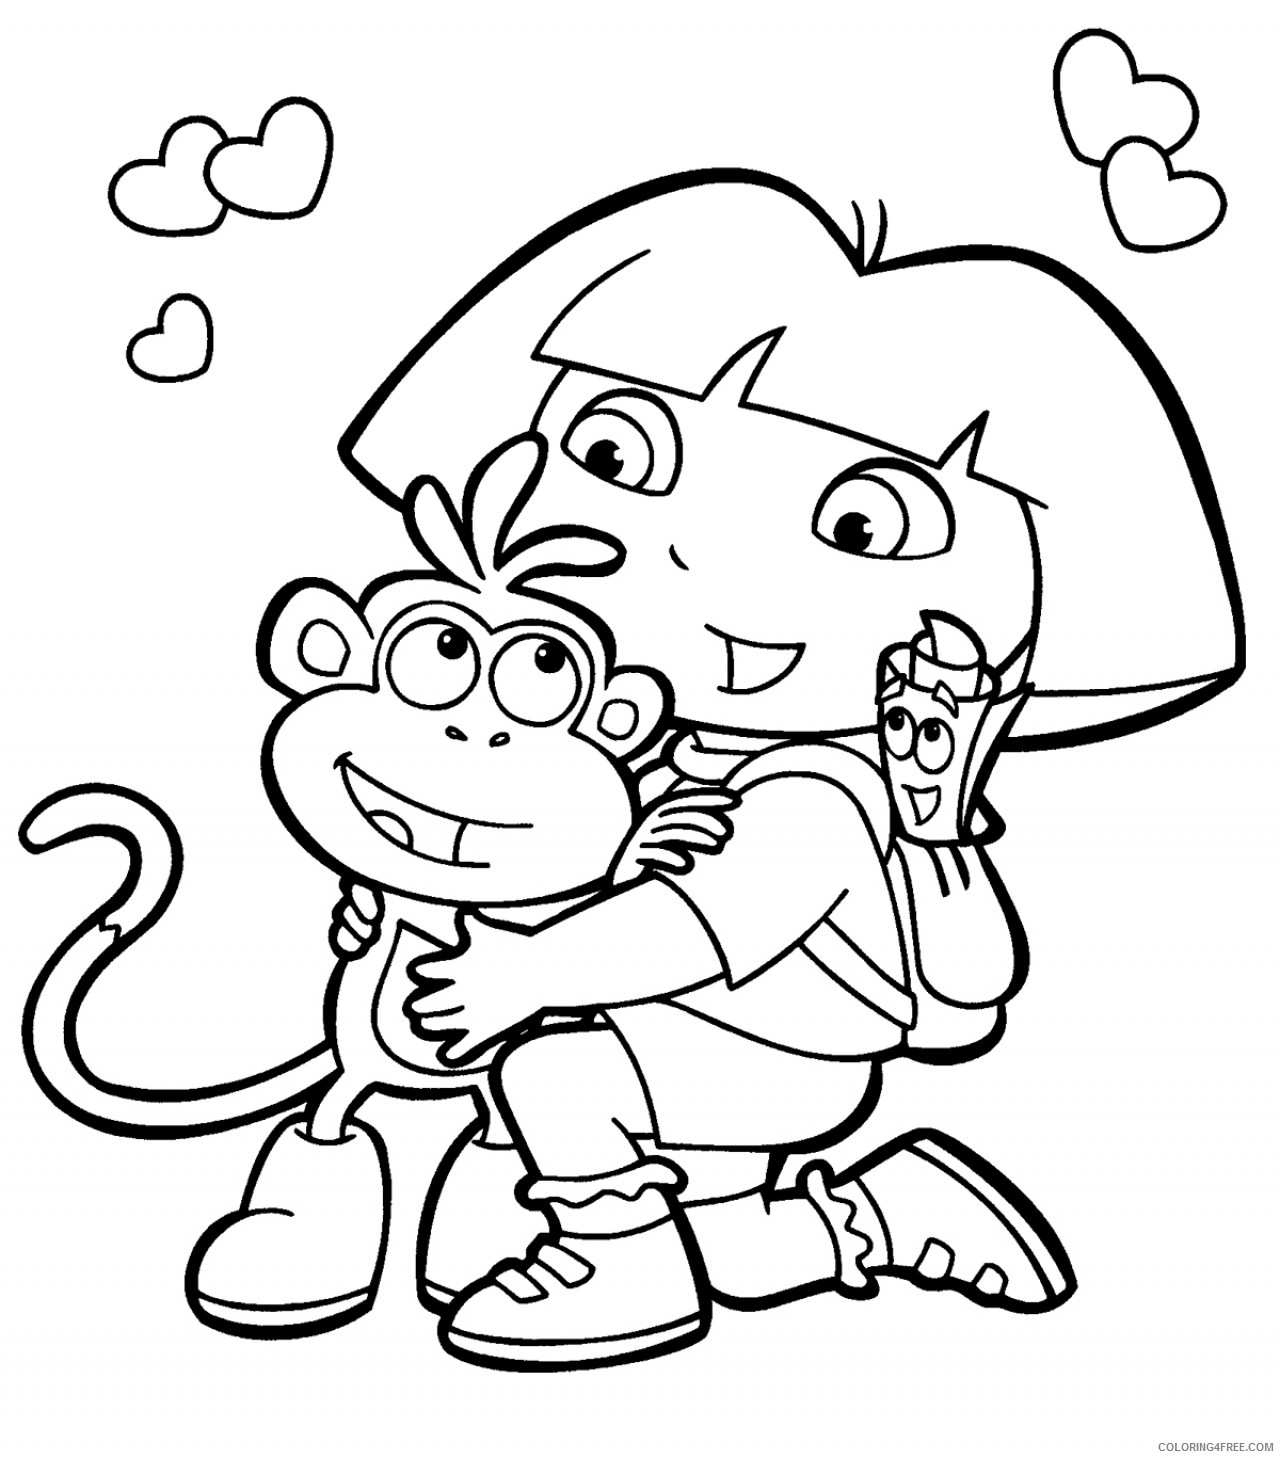 Dora the Explorer Coloring Pages Cartoons Dora for Kids Printable 2020 2647 Coloring4free